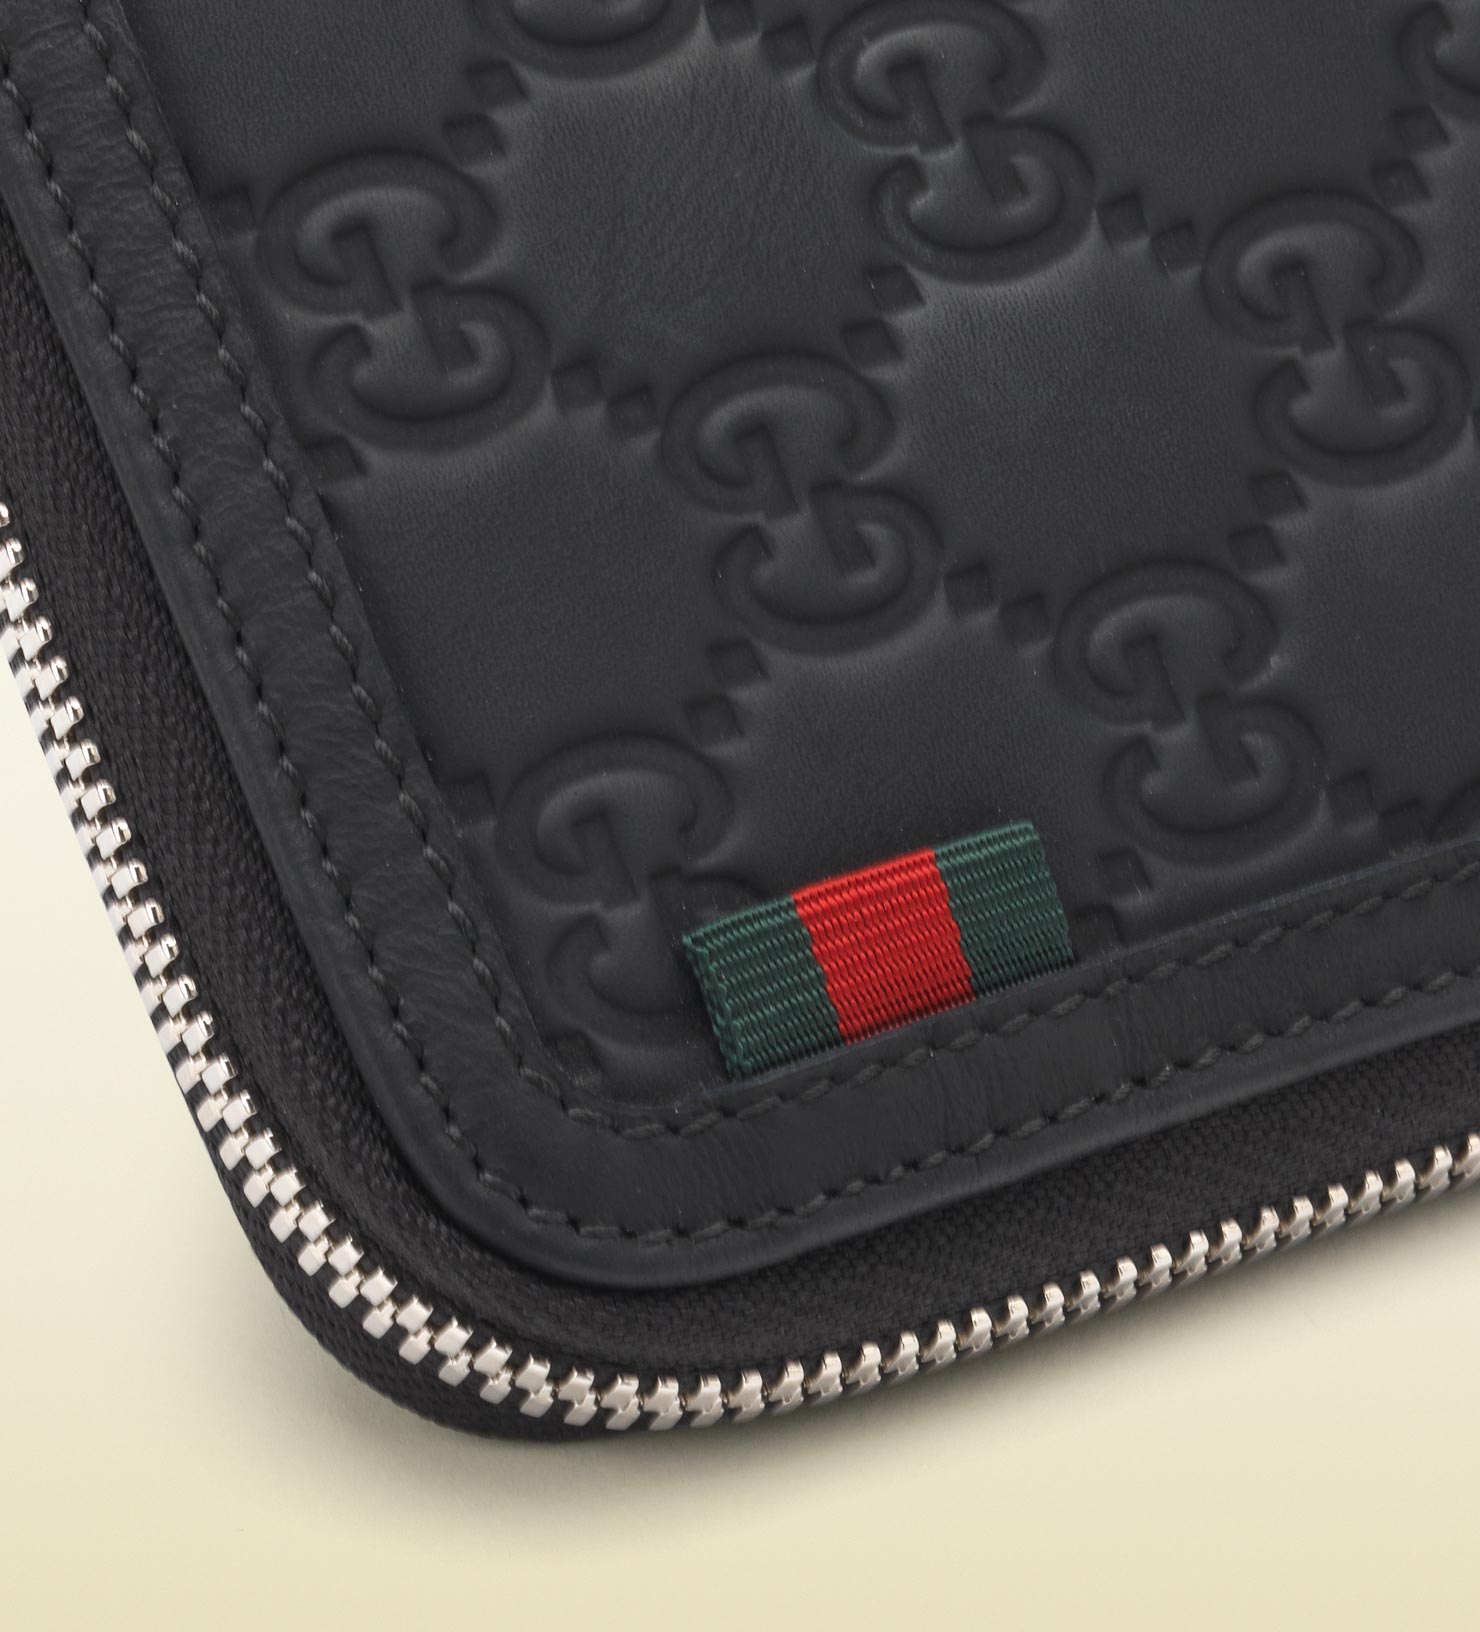 Lyst - Gucci Rubber Ssima Leather Zip Around Wallet in Black for Men